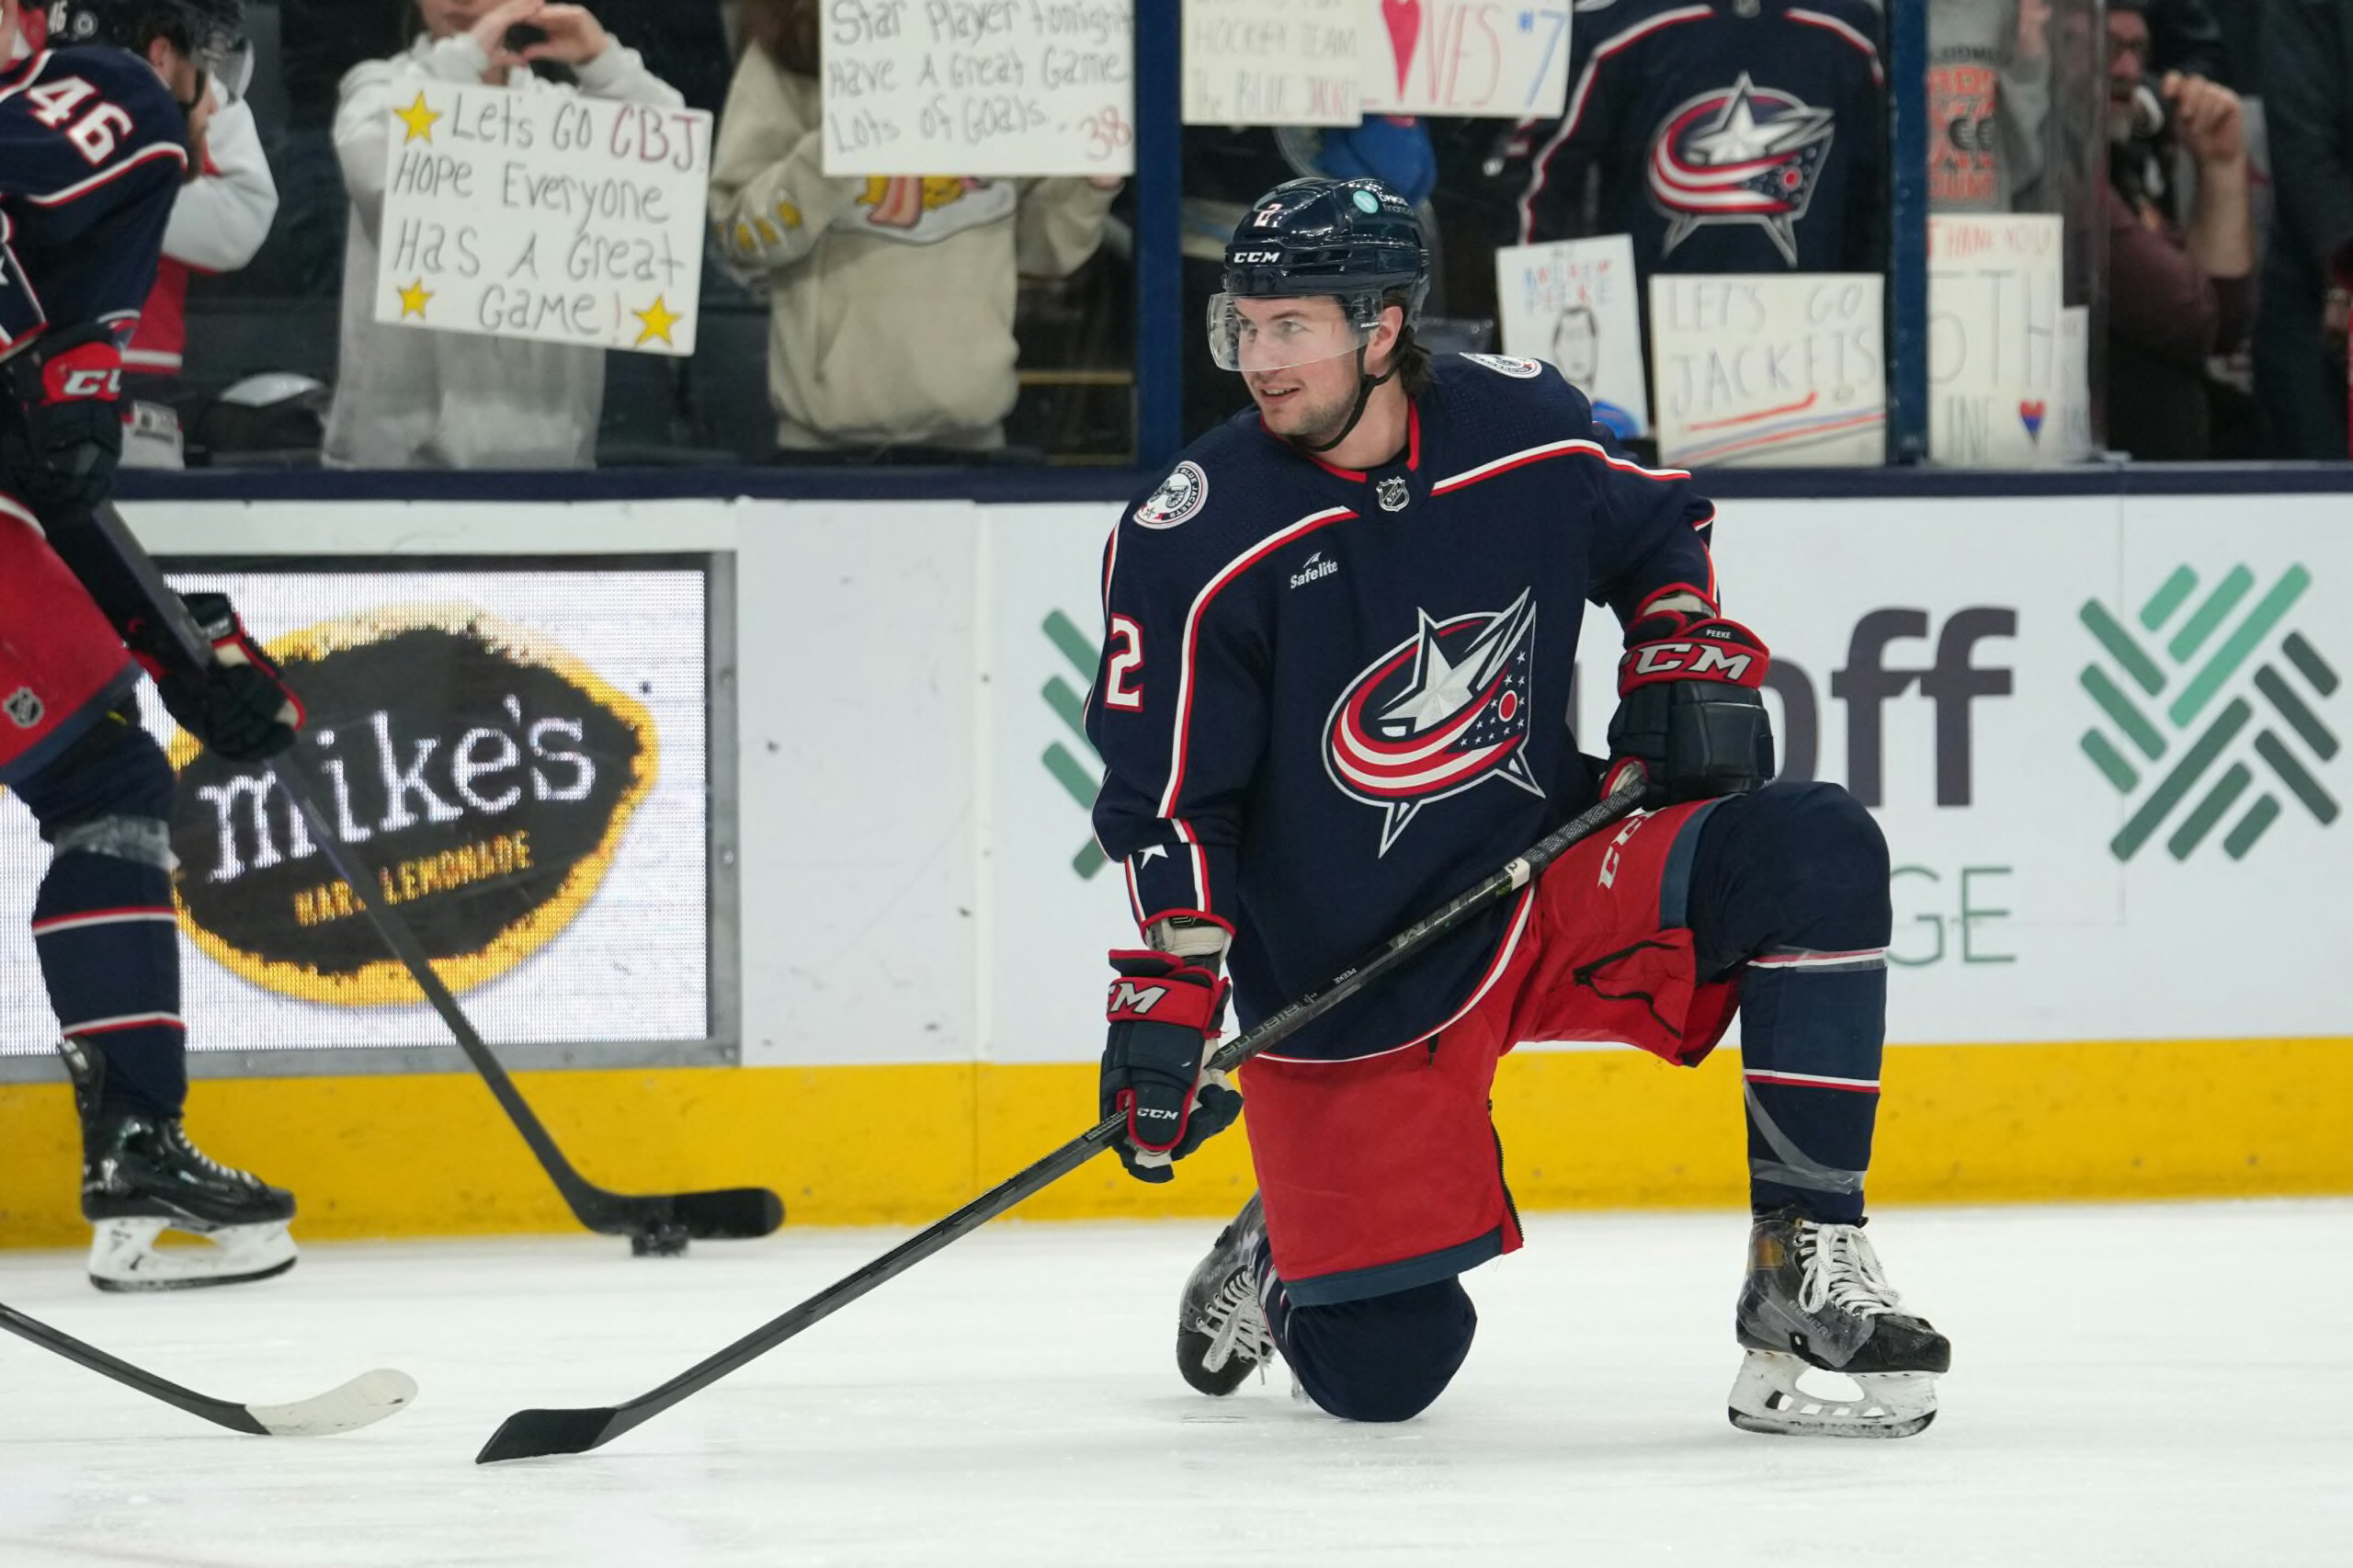 Oiler alumnus Nick Blankenburg signs NHL contract with Columbus -   - Local news, Weather, Sports, and Job Listings for  Okotoks, Alberta, and area.